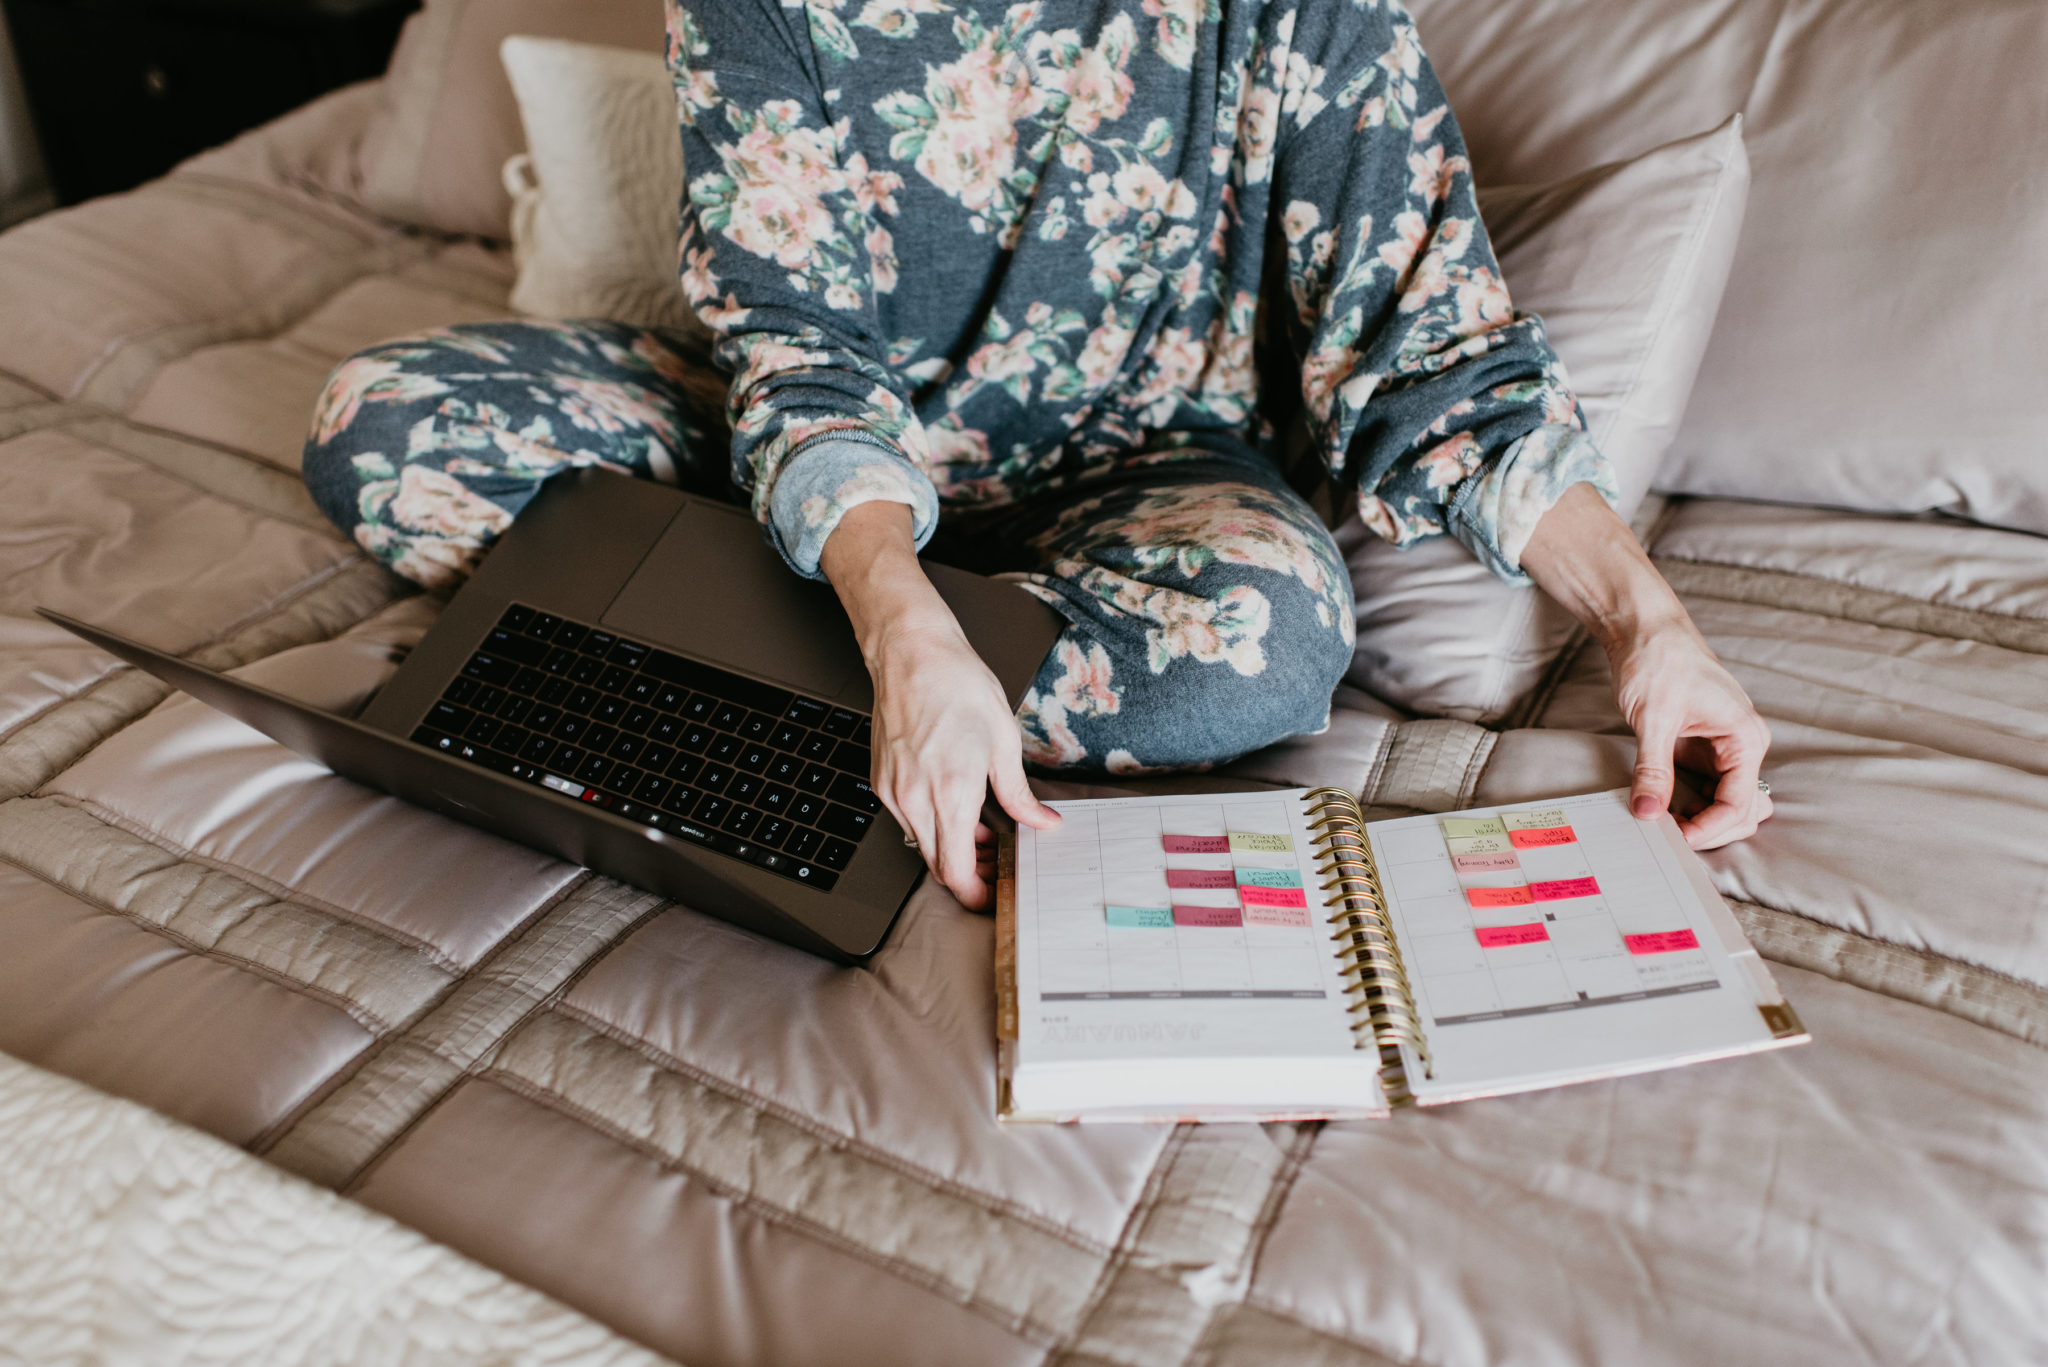 5 Planner Organization Tips for a Successful Year by popular Las Vegas lifestyle blogger Outfits & Outings: image of a woman working on her laptop and looking at her Day Designer planners with Happy Planner stickers